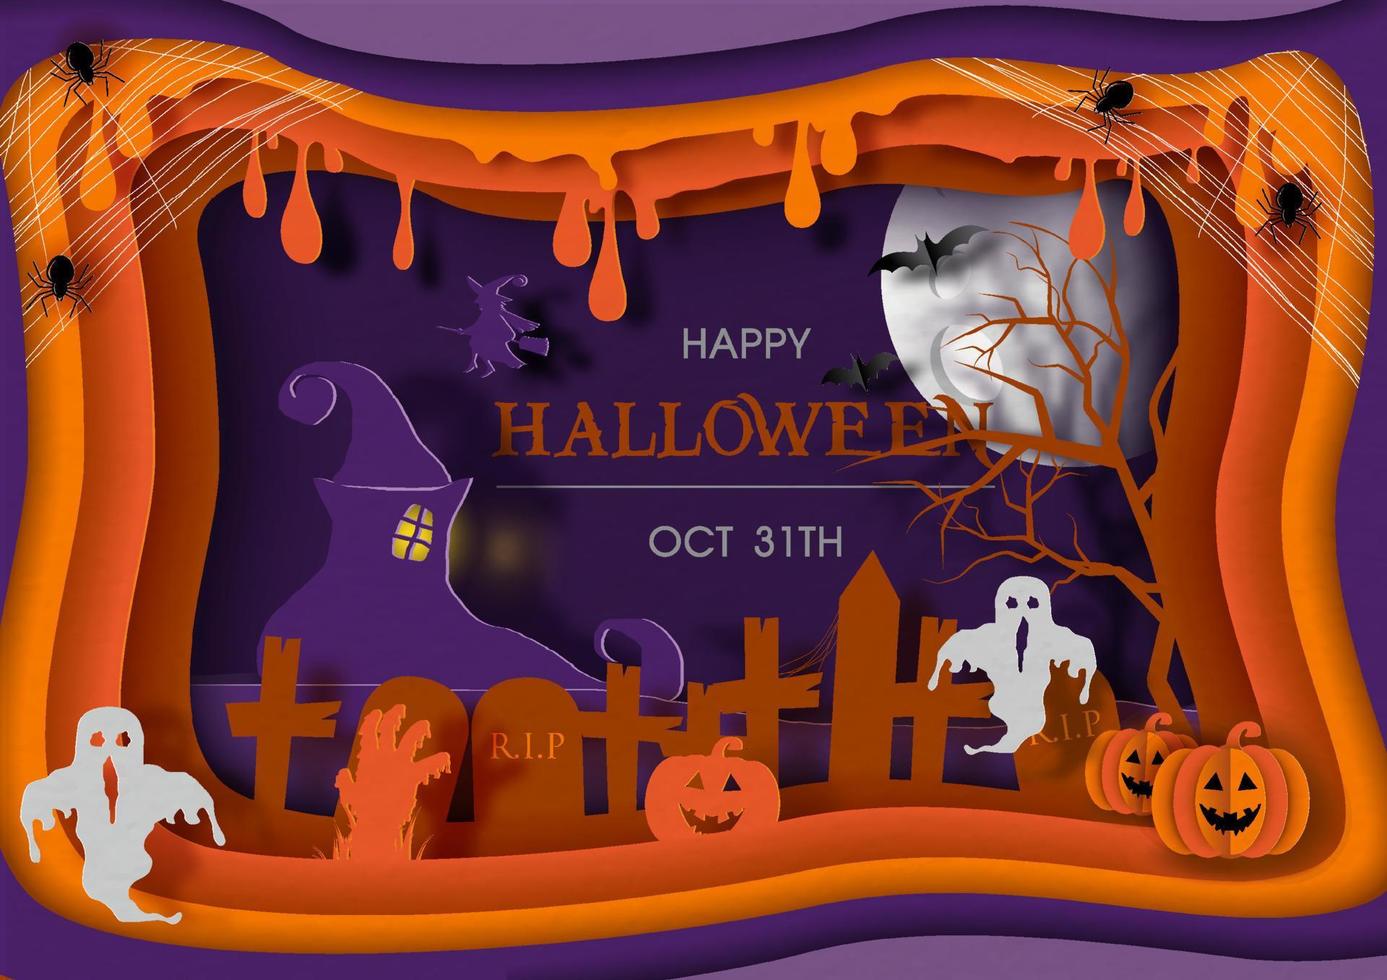 Halloween atmosphere with scary ghosts and Jack o'lanterns pumpkins in a photo frame and paper cut design on Happy Halloween lettering and paper pattern background. vector